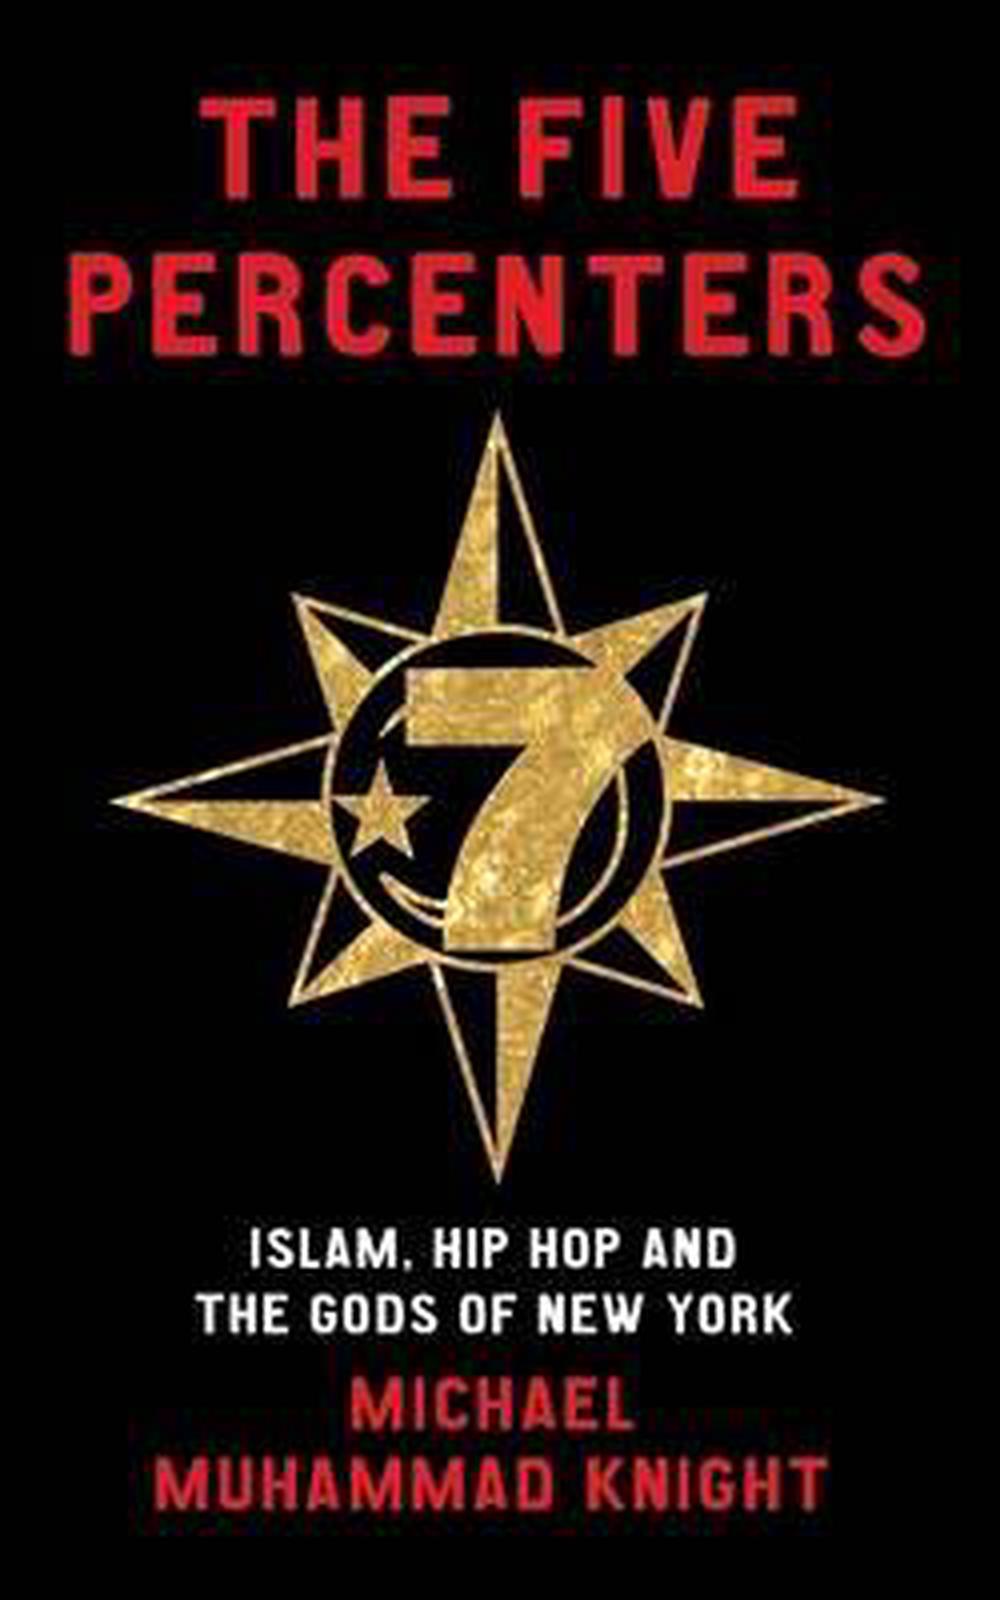 The Five Percenters: Islam, Hip Hop, and the Gods of New York